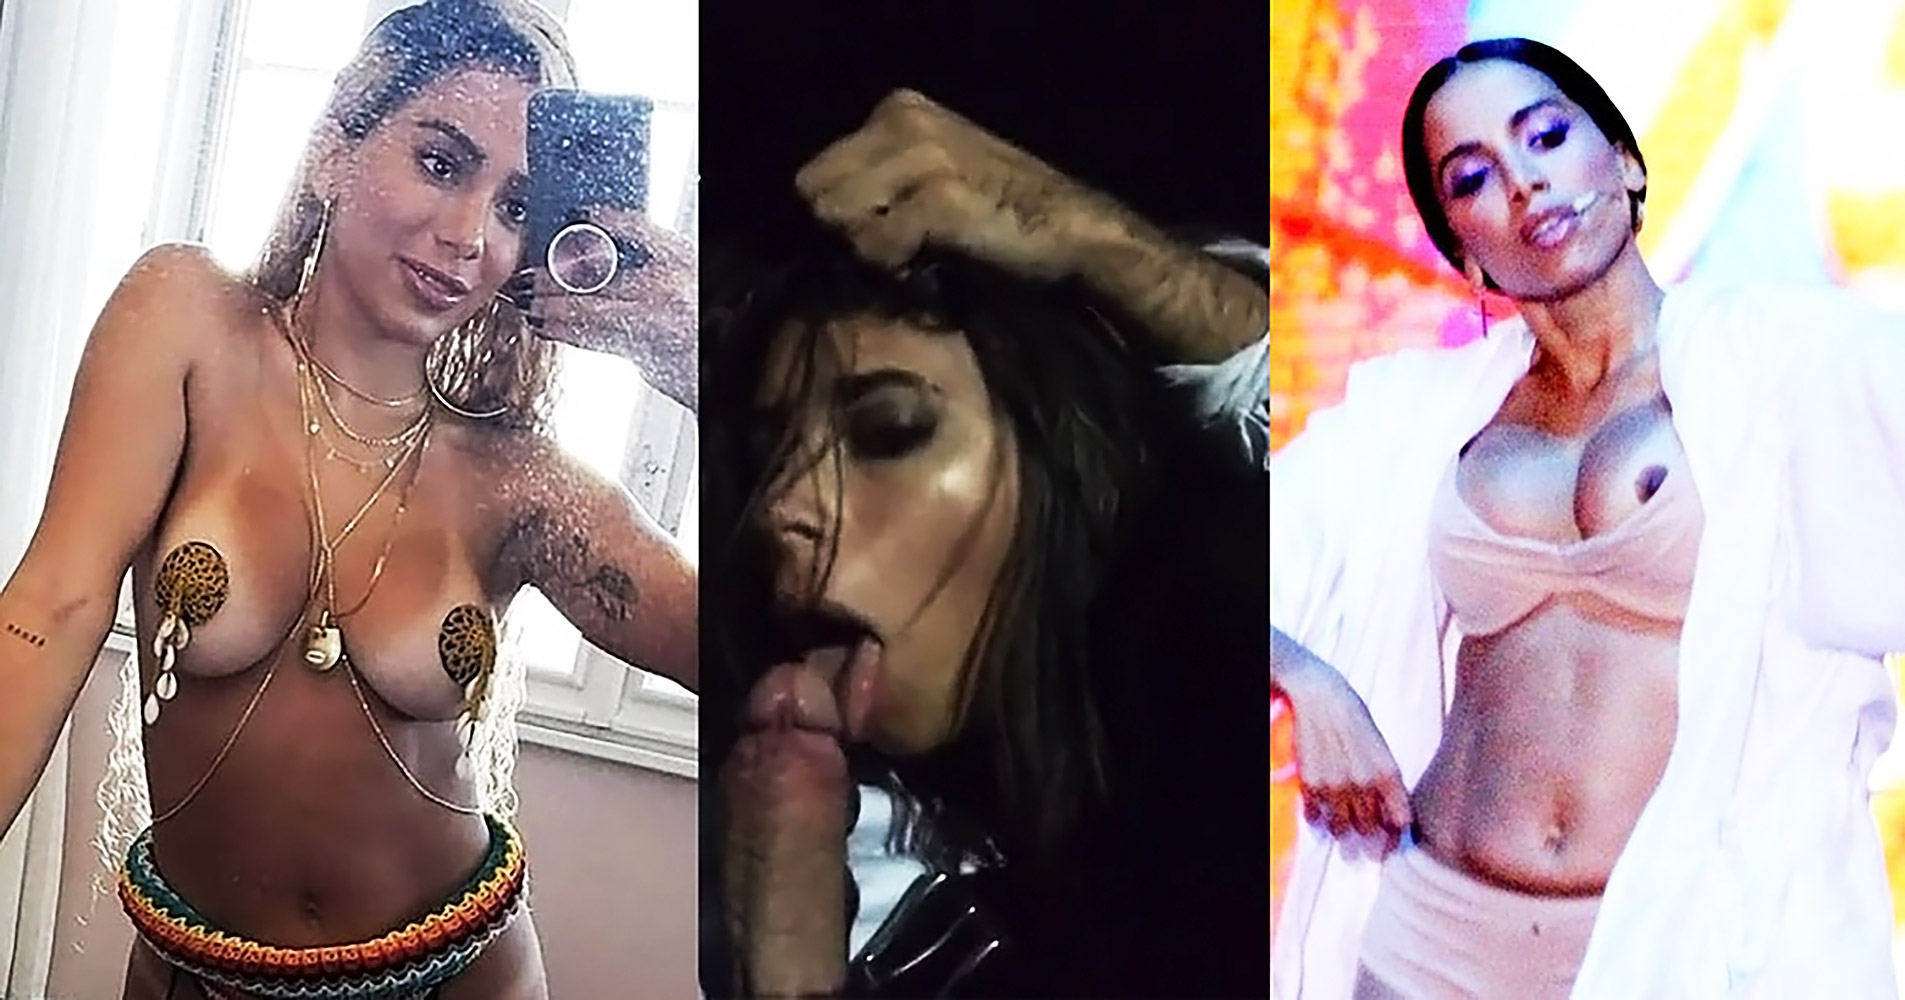 Anitta Nude Pics And Videos And Leaked Sex Tape Scandal Planet. 